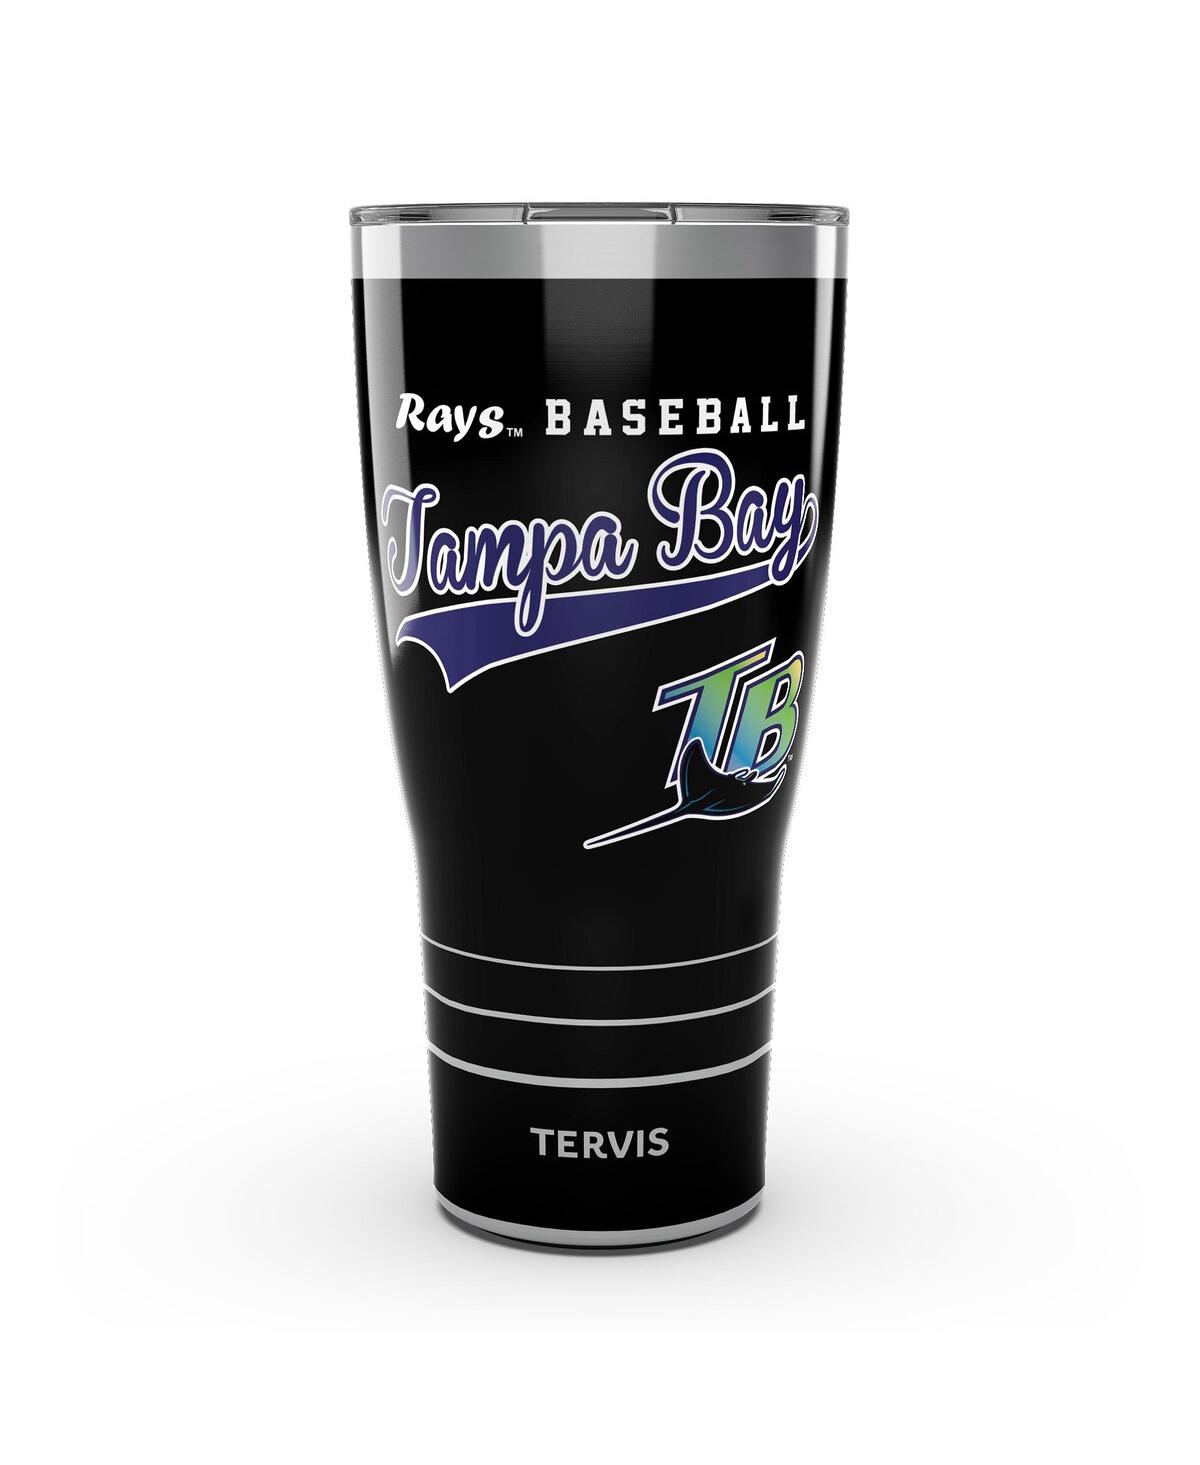 Tervis Tumbler Tampa Bay Rays 30 oz Vintage-inspired Stainless Steel Tumbler In Black